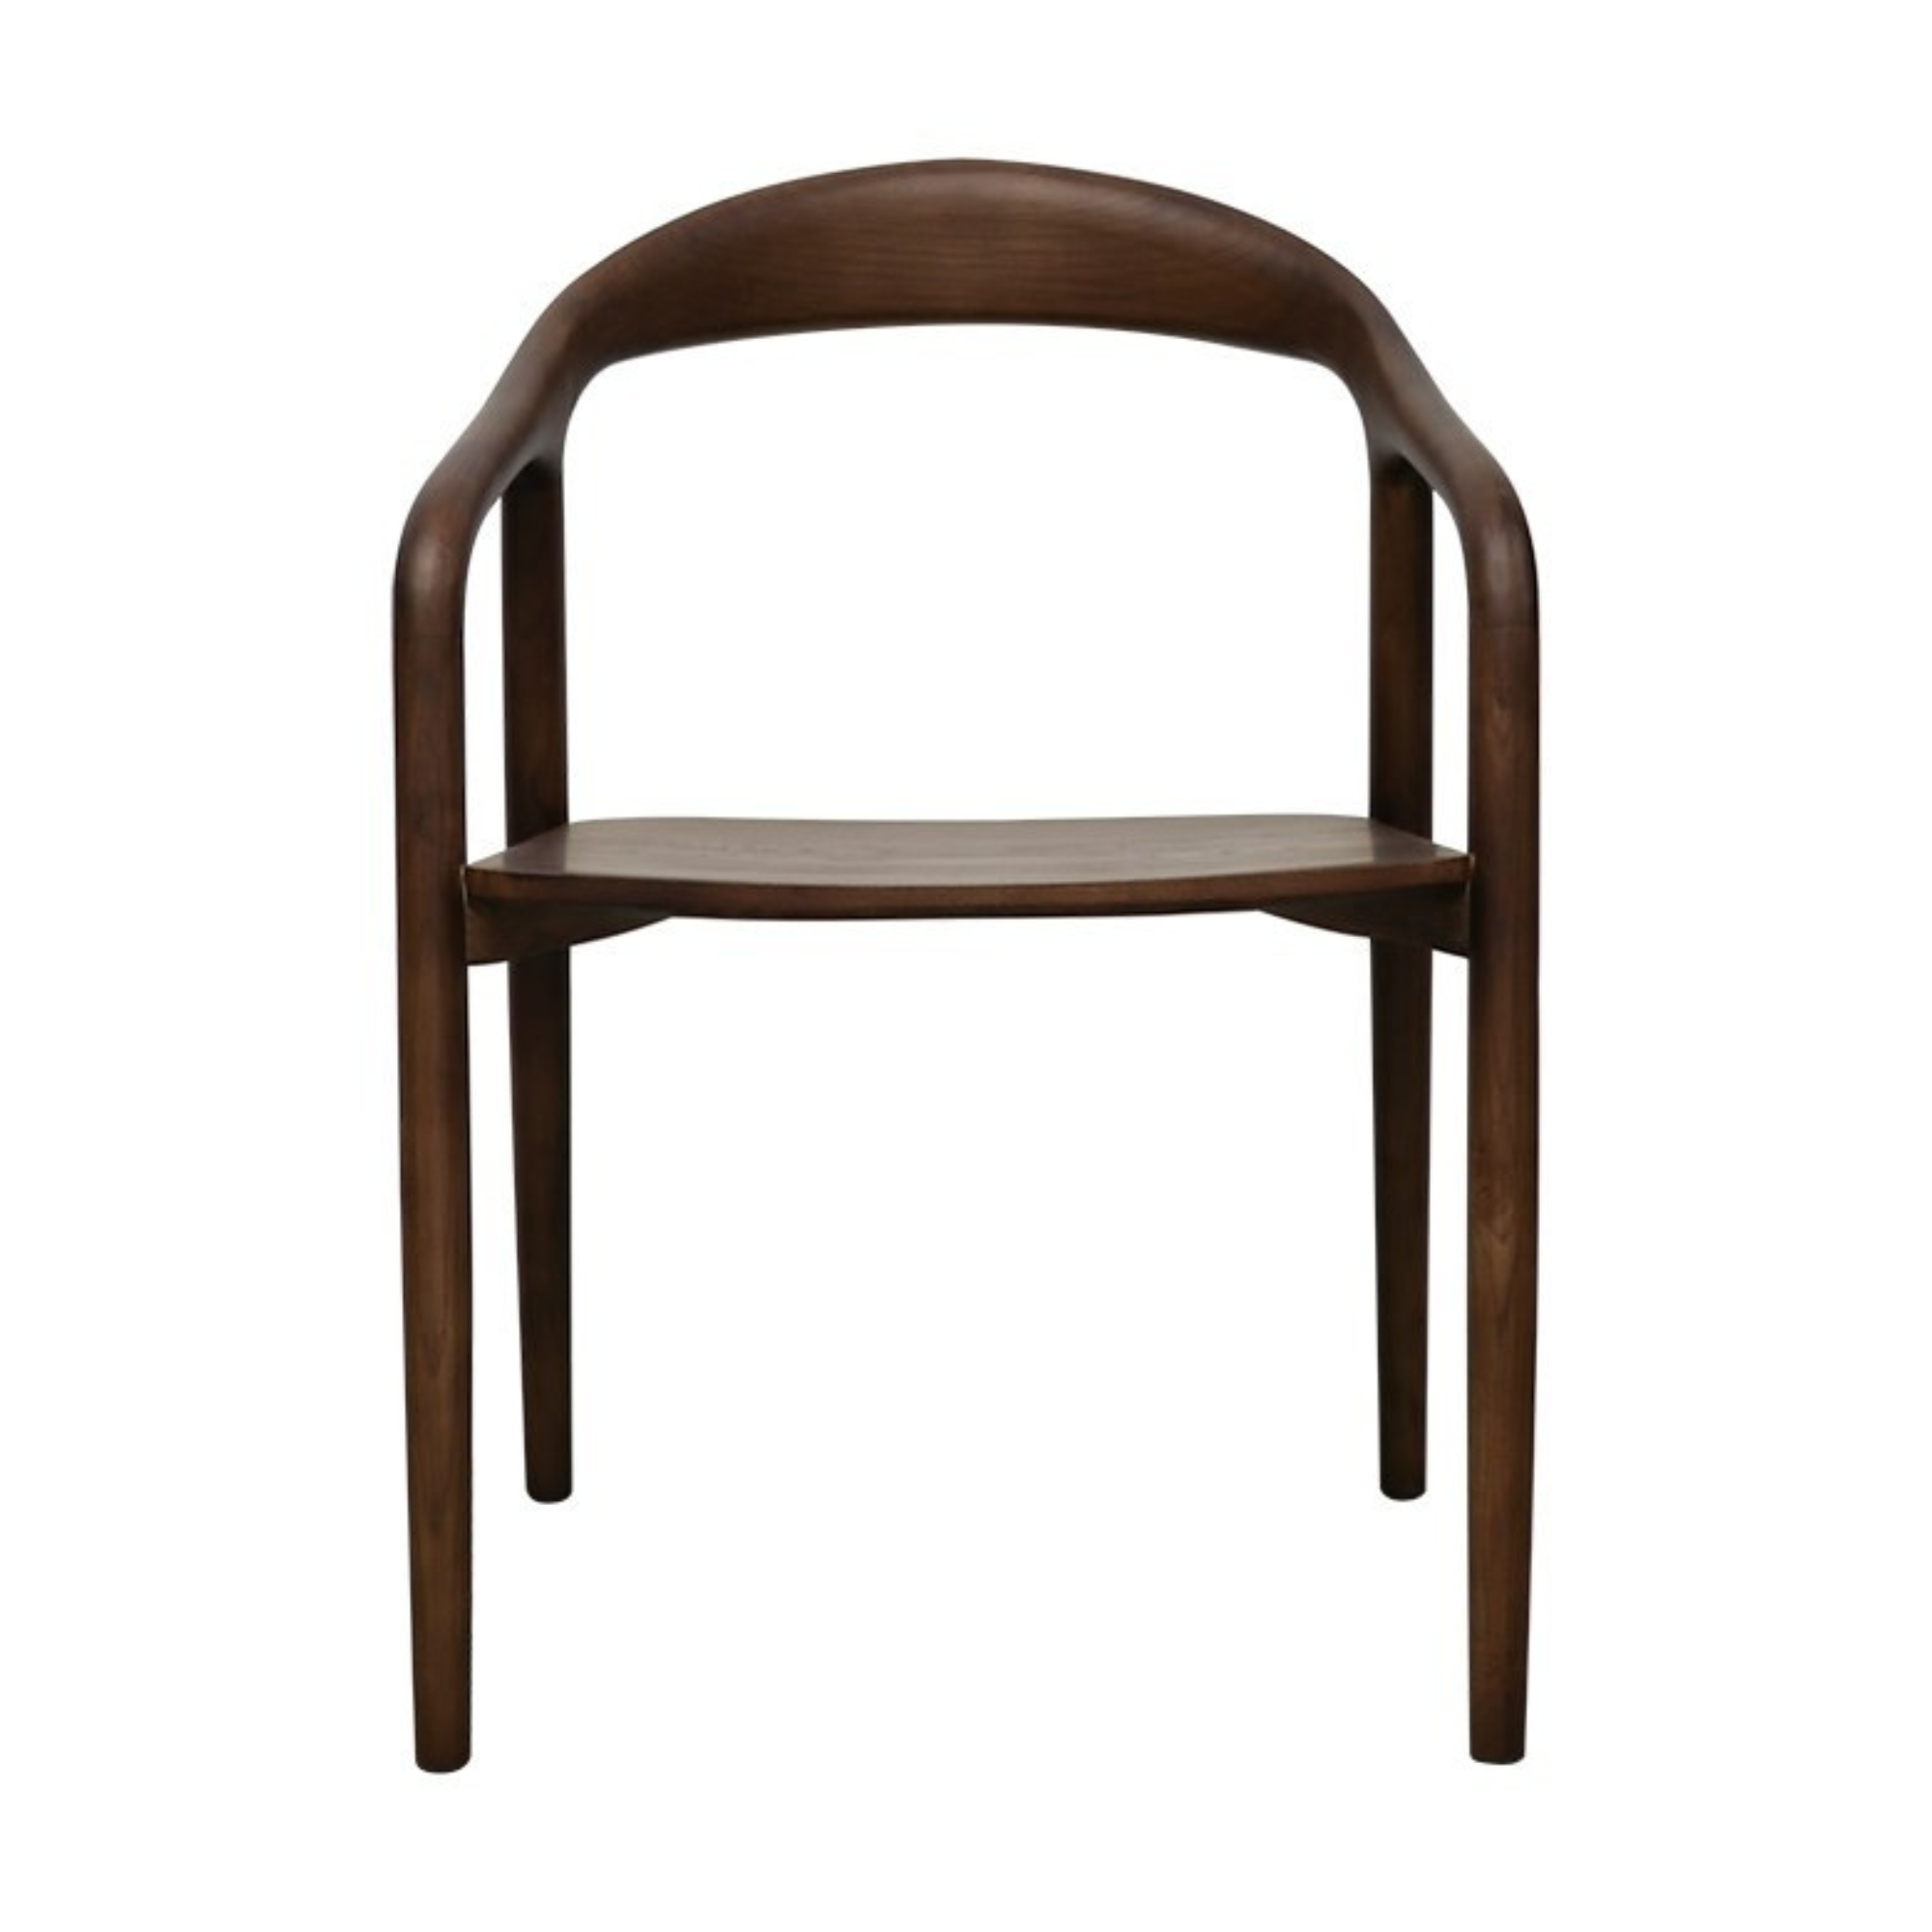 MARGOT SOLID ASH DINING CHAIRS | 3 FRAME COLOURS